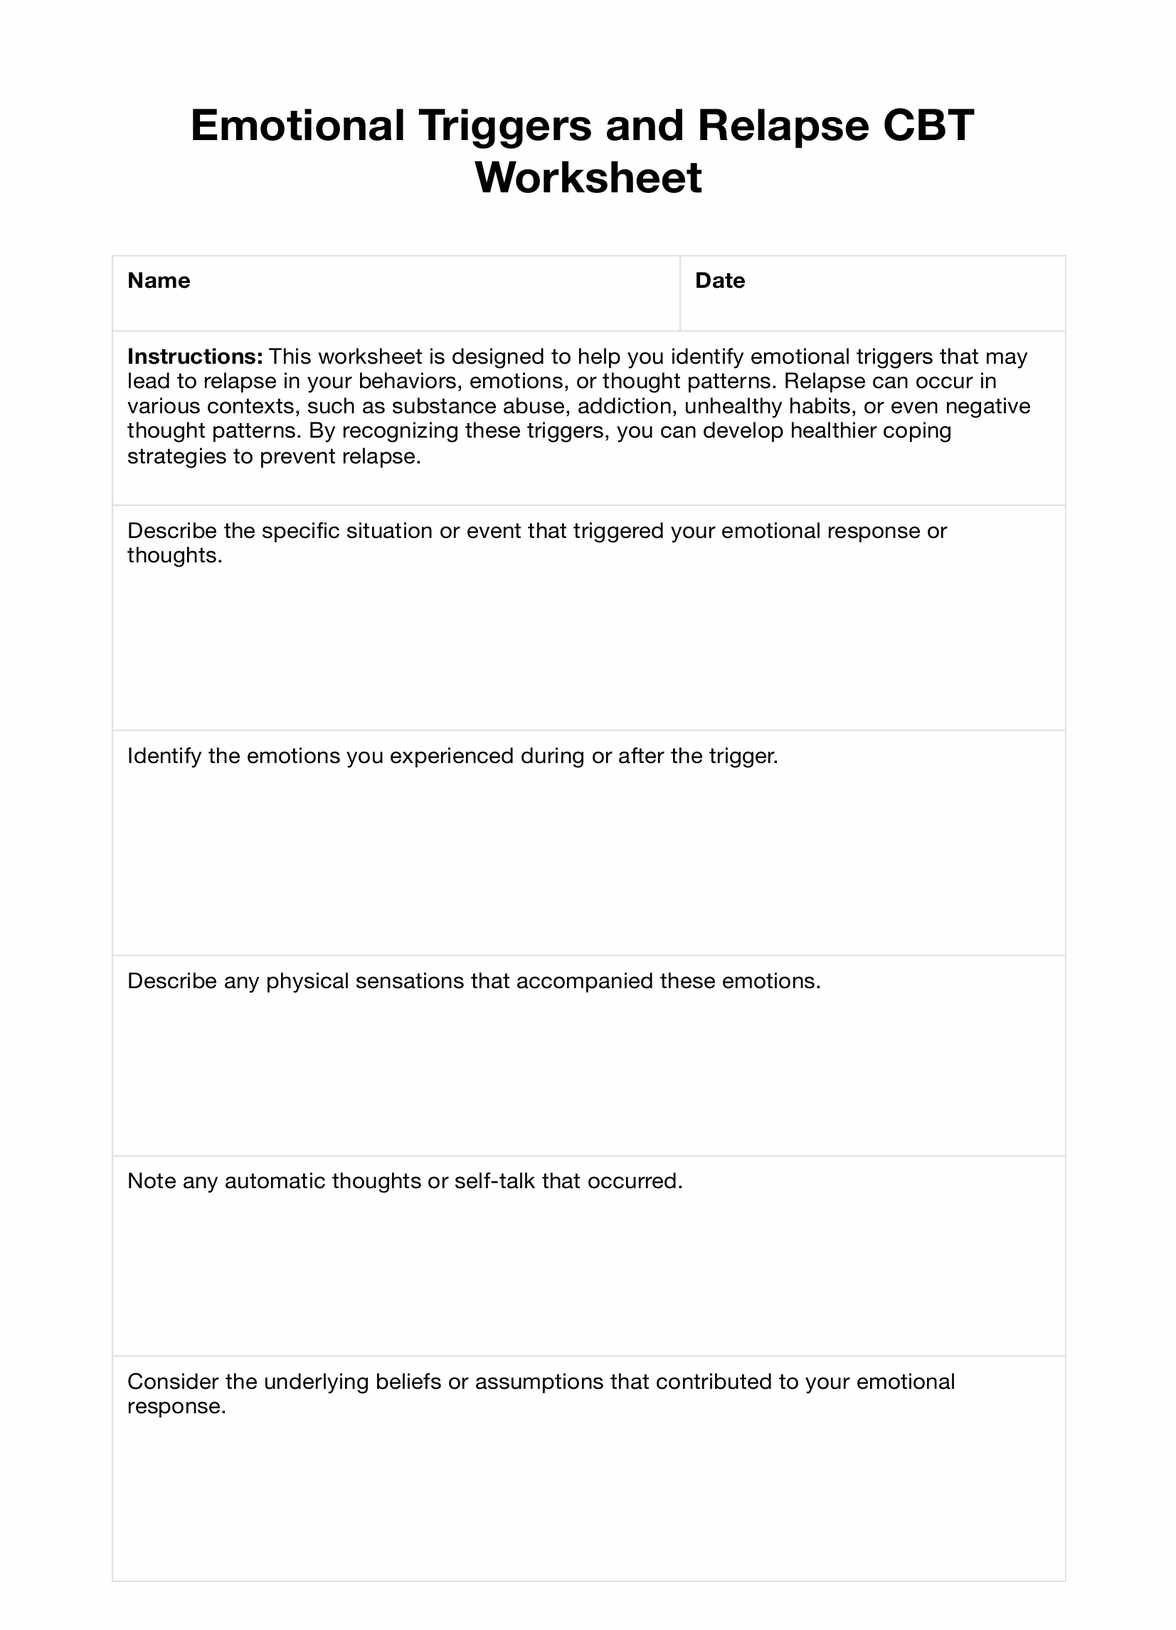 Emotional Triggers and Relapse CBT Worksheets PDF Example